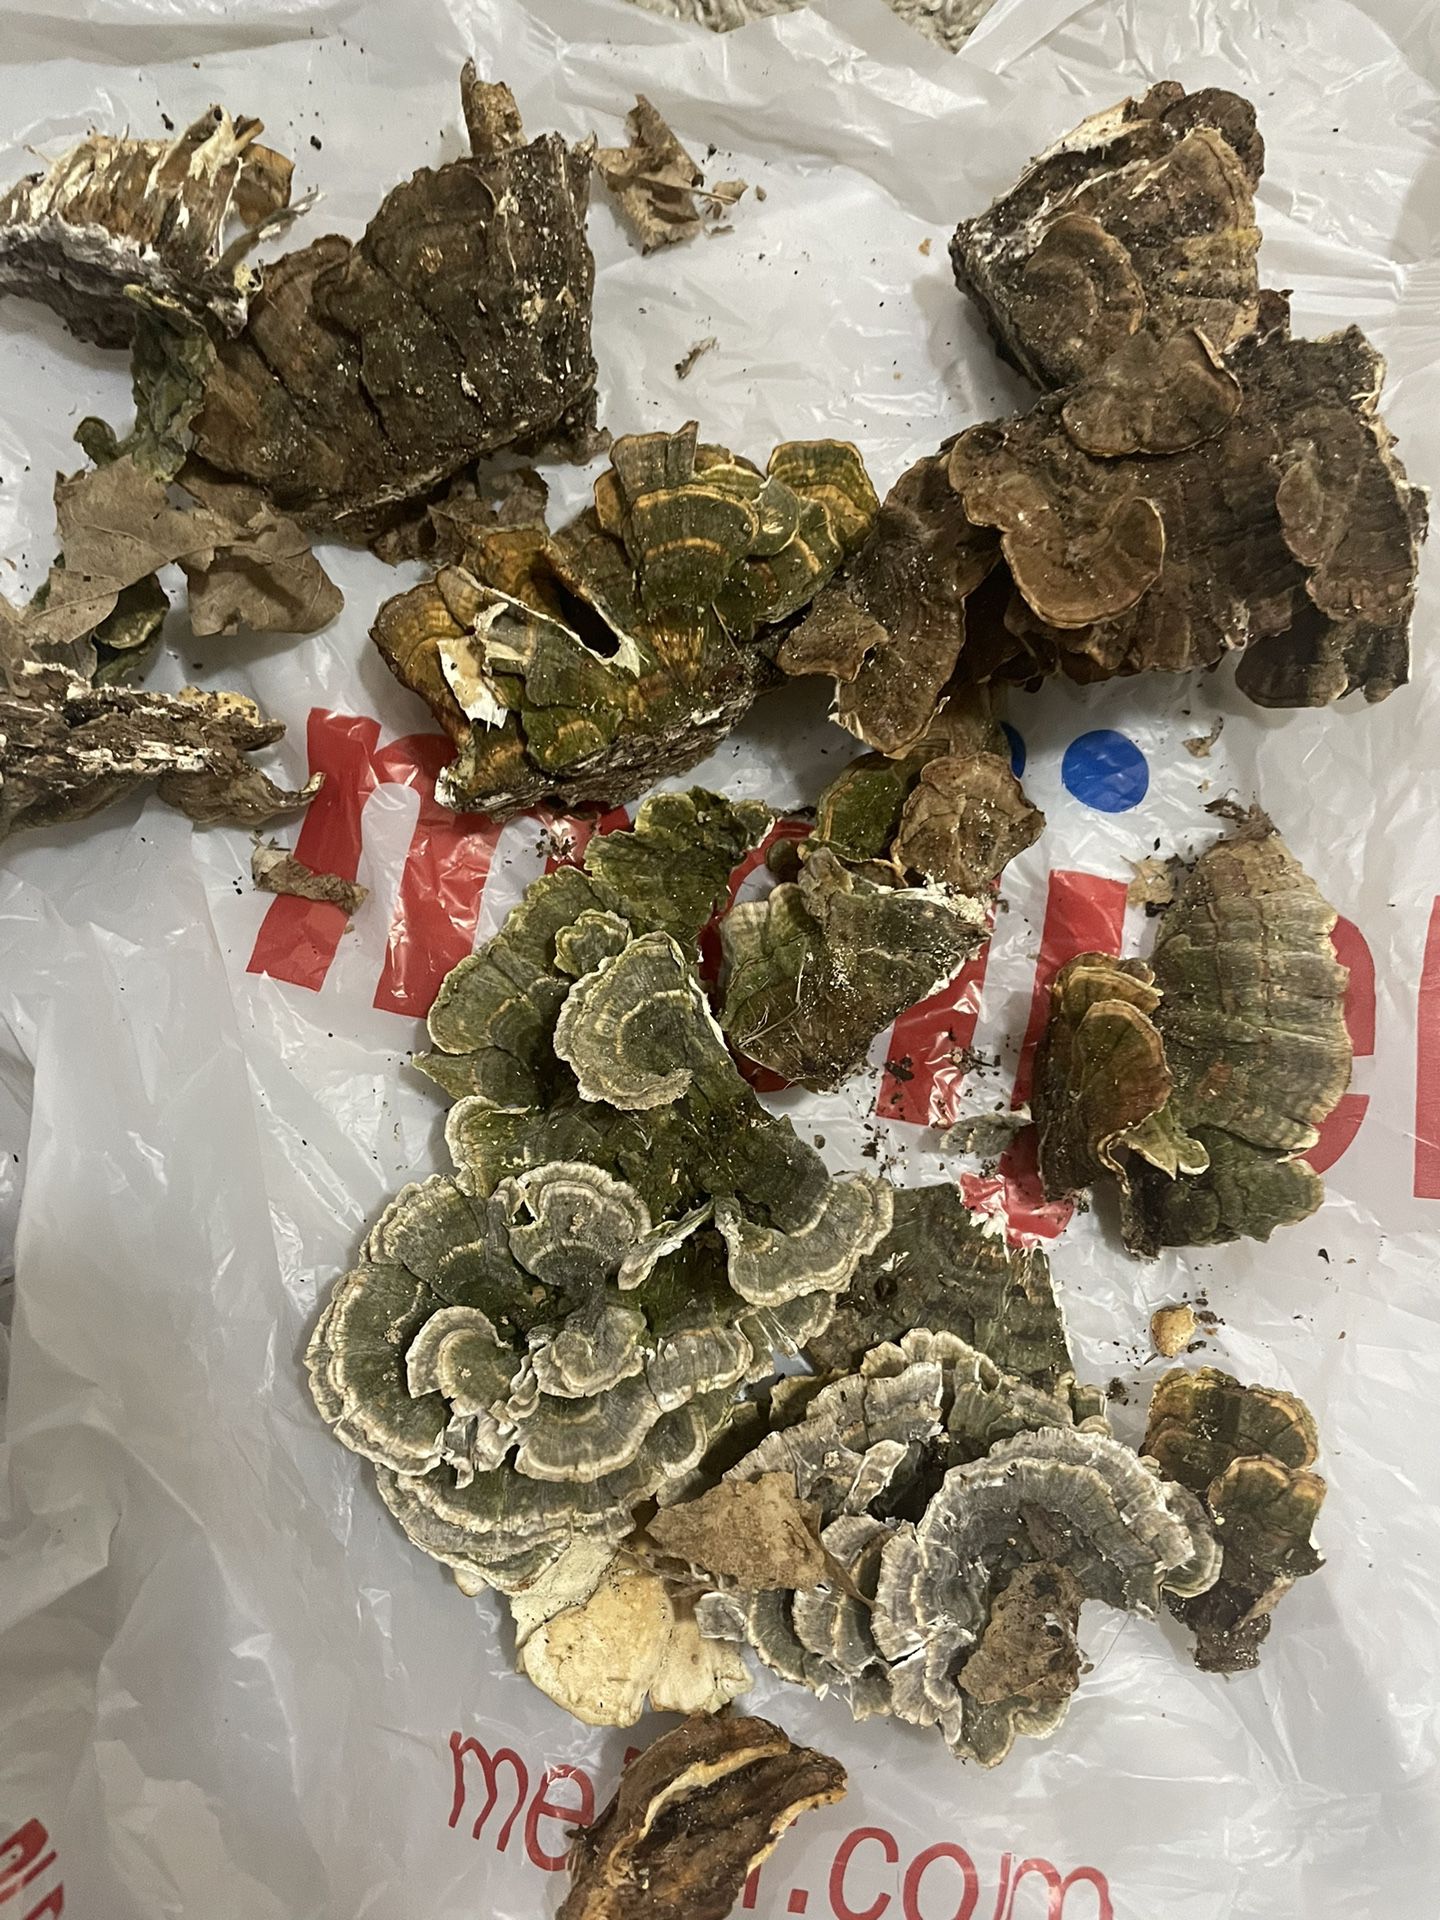 Possible Turkey Tail?